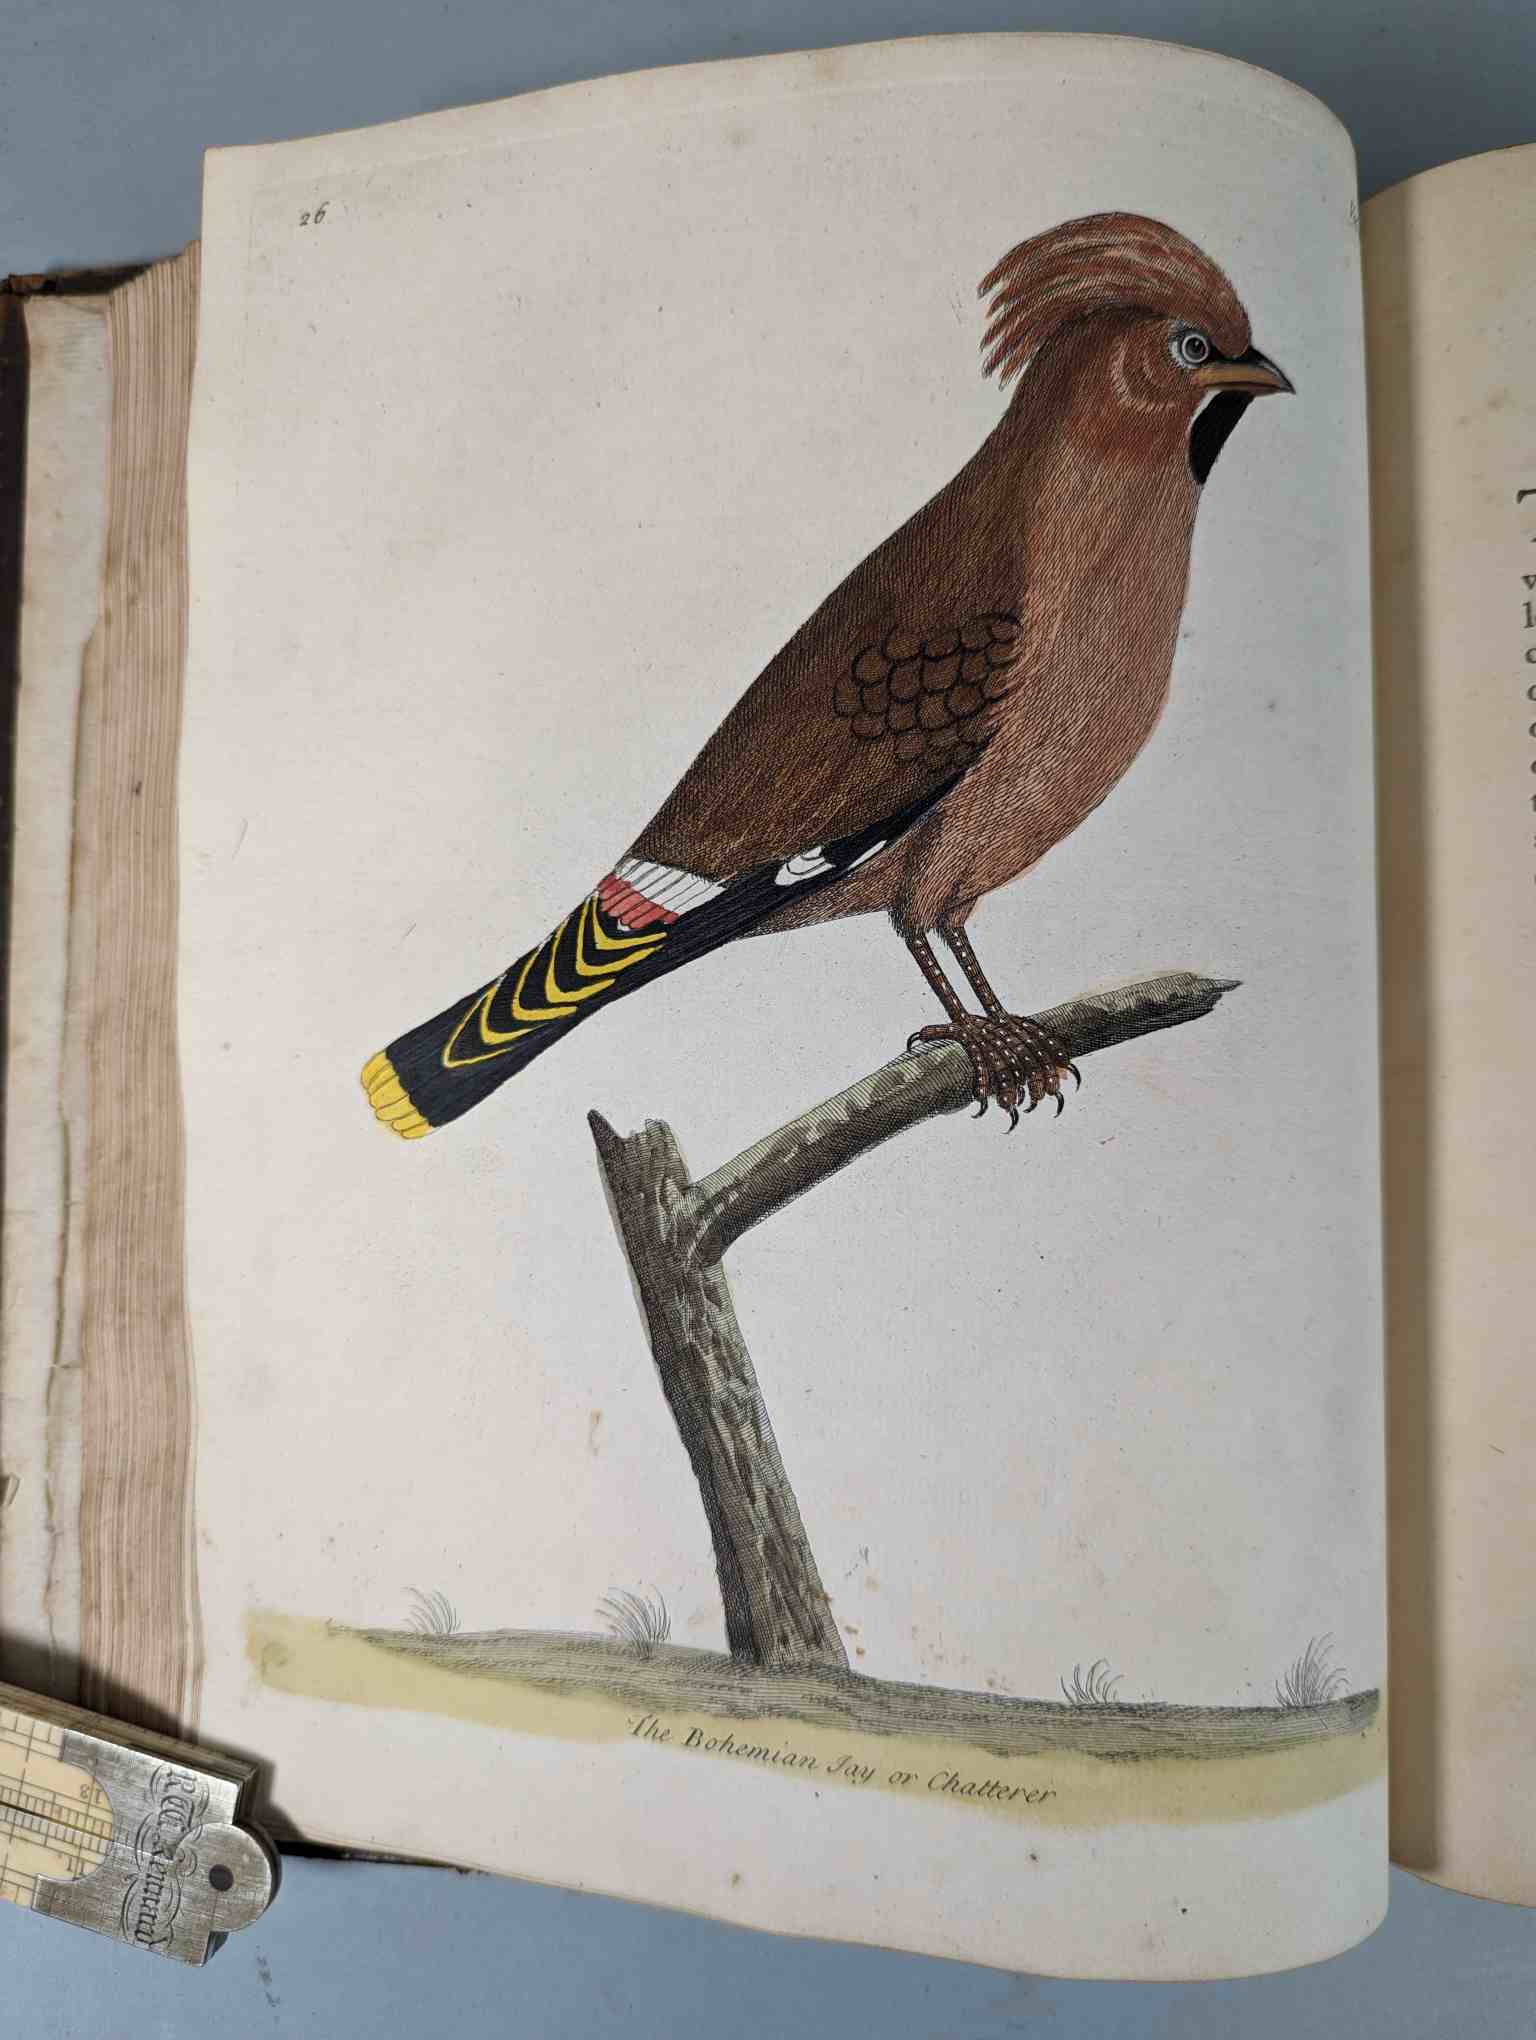 ALBIN, Eleazar. A Natural History of Birds, to which are added, Notes and Observations by W. - Image 130 of 208